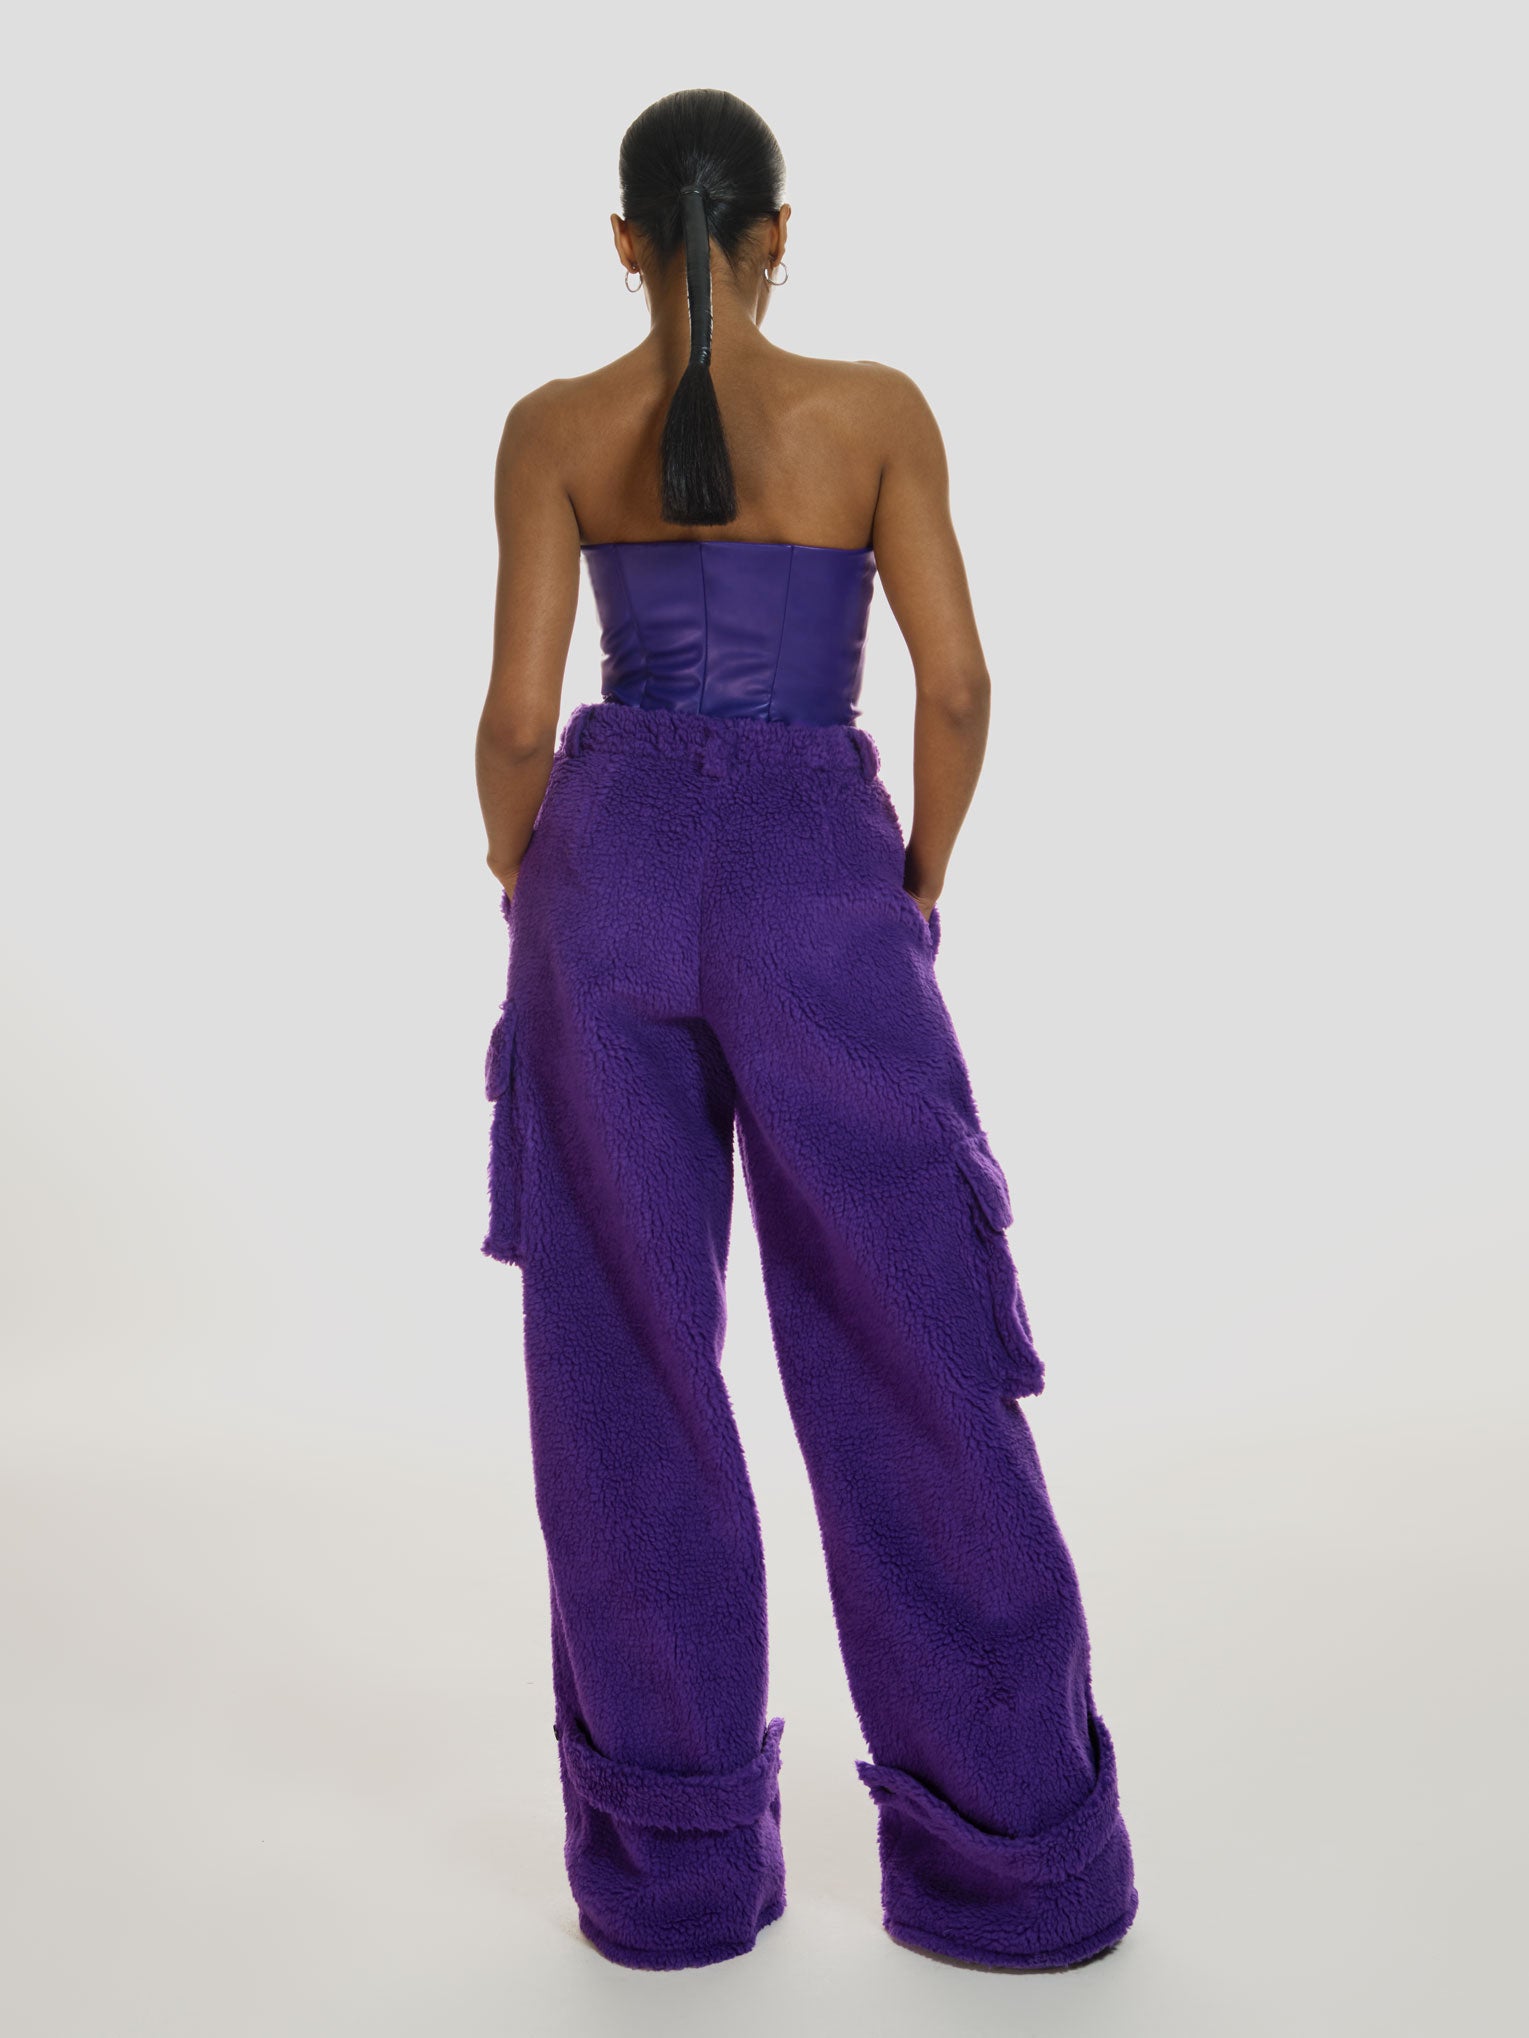 Full shot of a girl facing back with her hands in pockets wearing a purple vegan leather tube top and purple polar fleece cargo pants